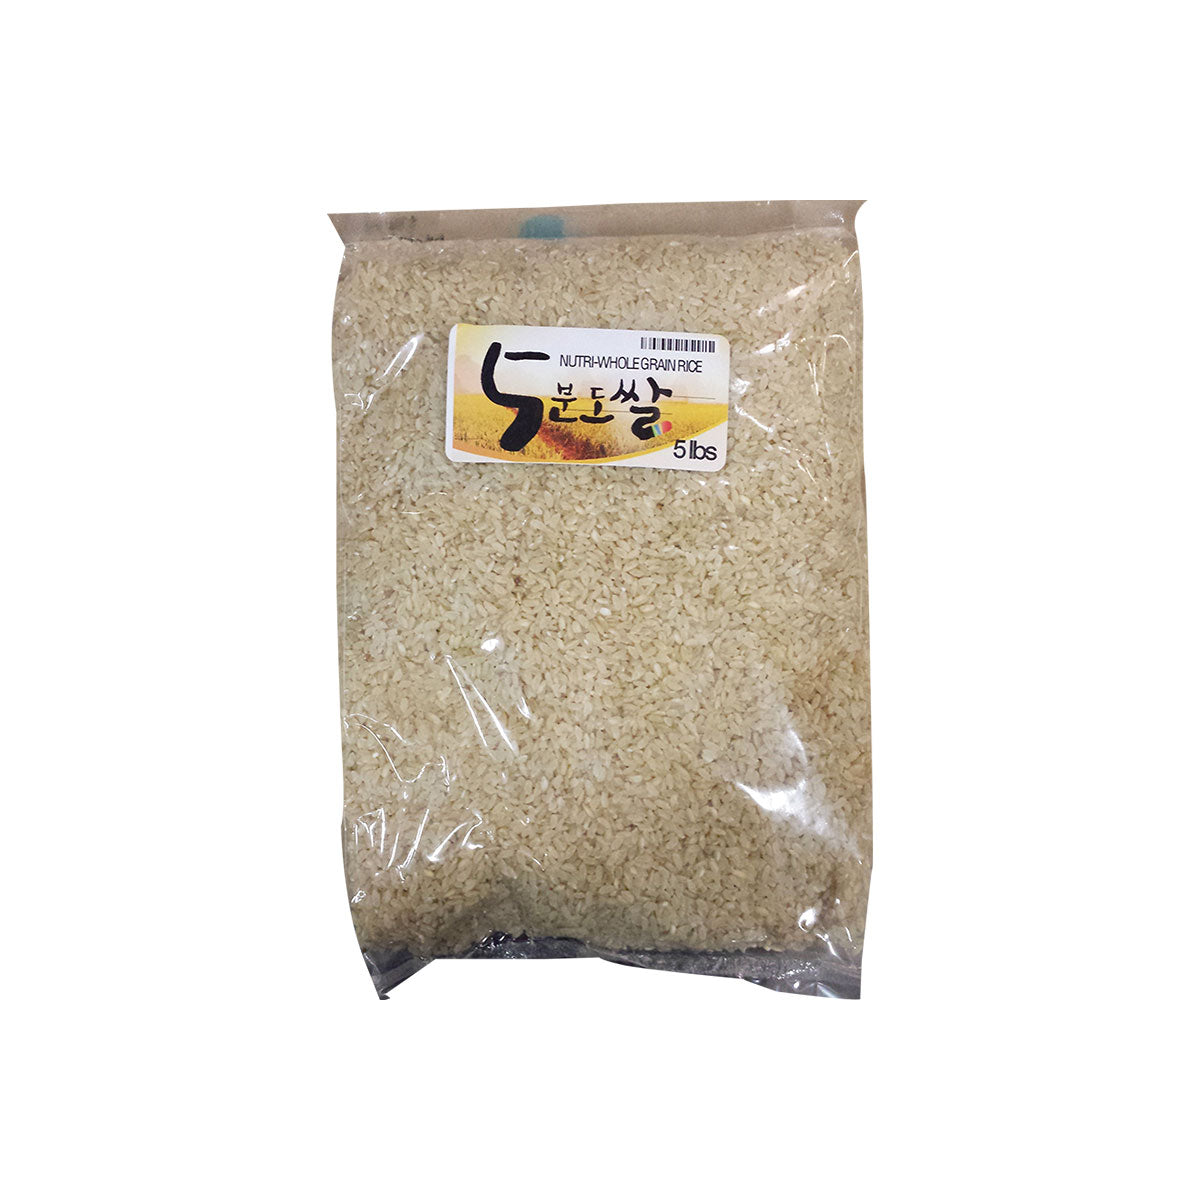 Partially Milled Rice 8/5Lbs 오분도미